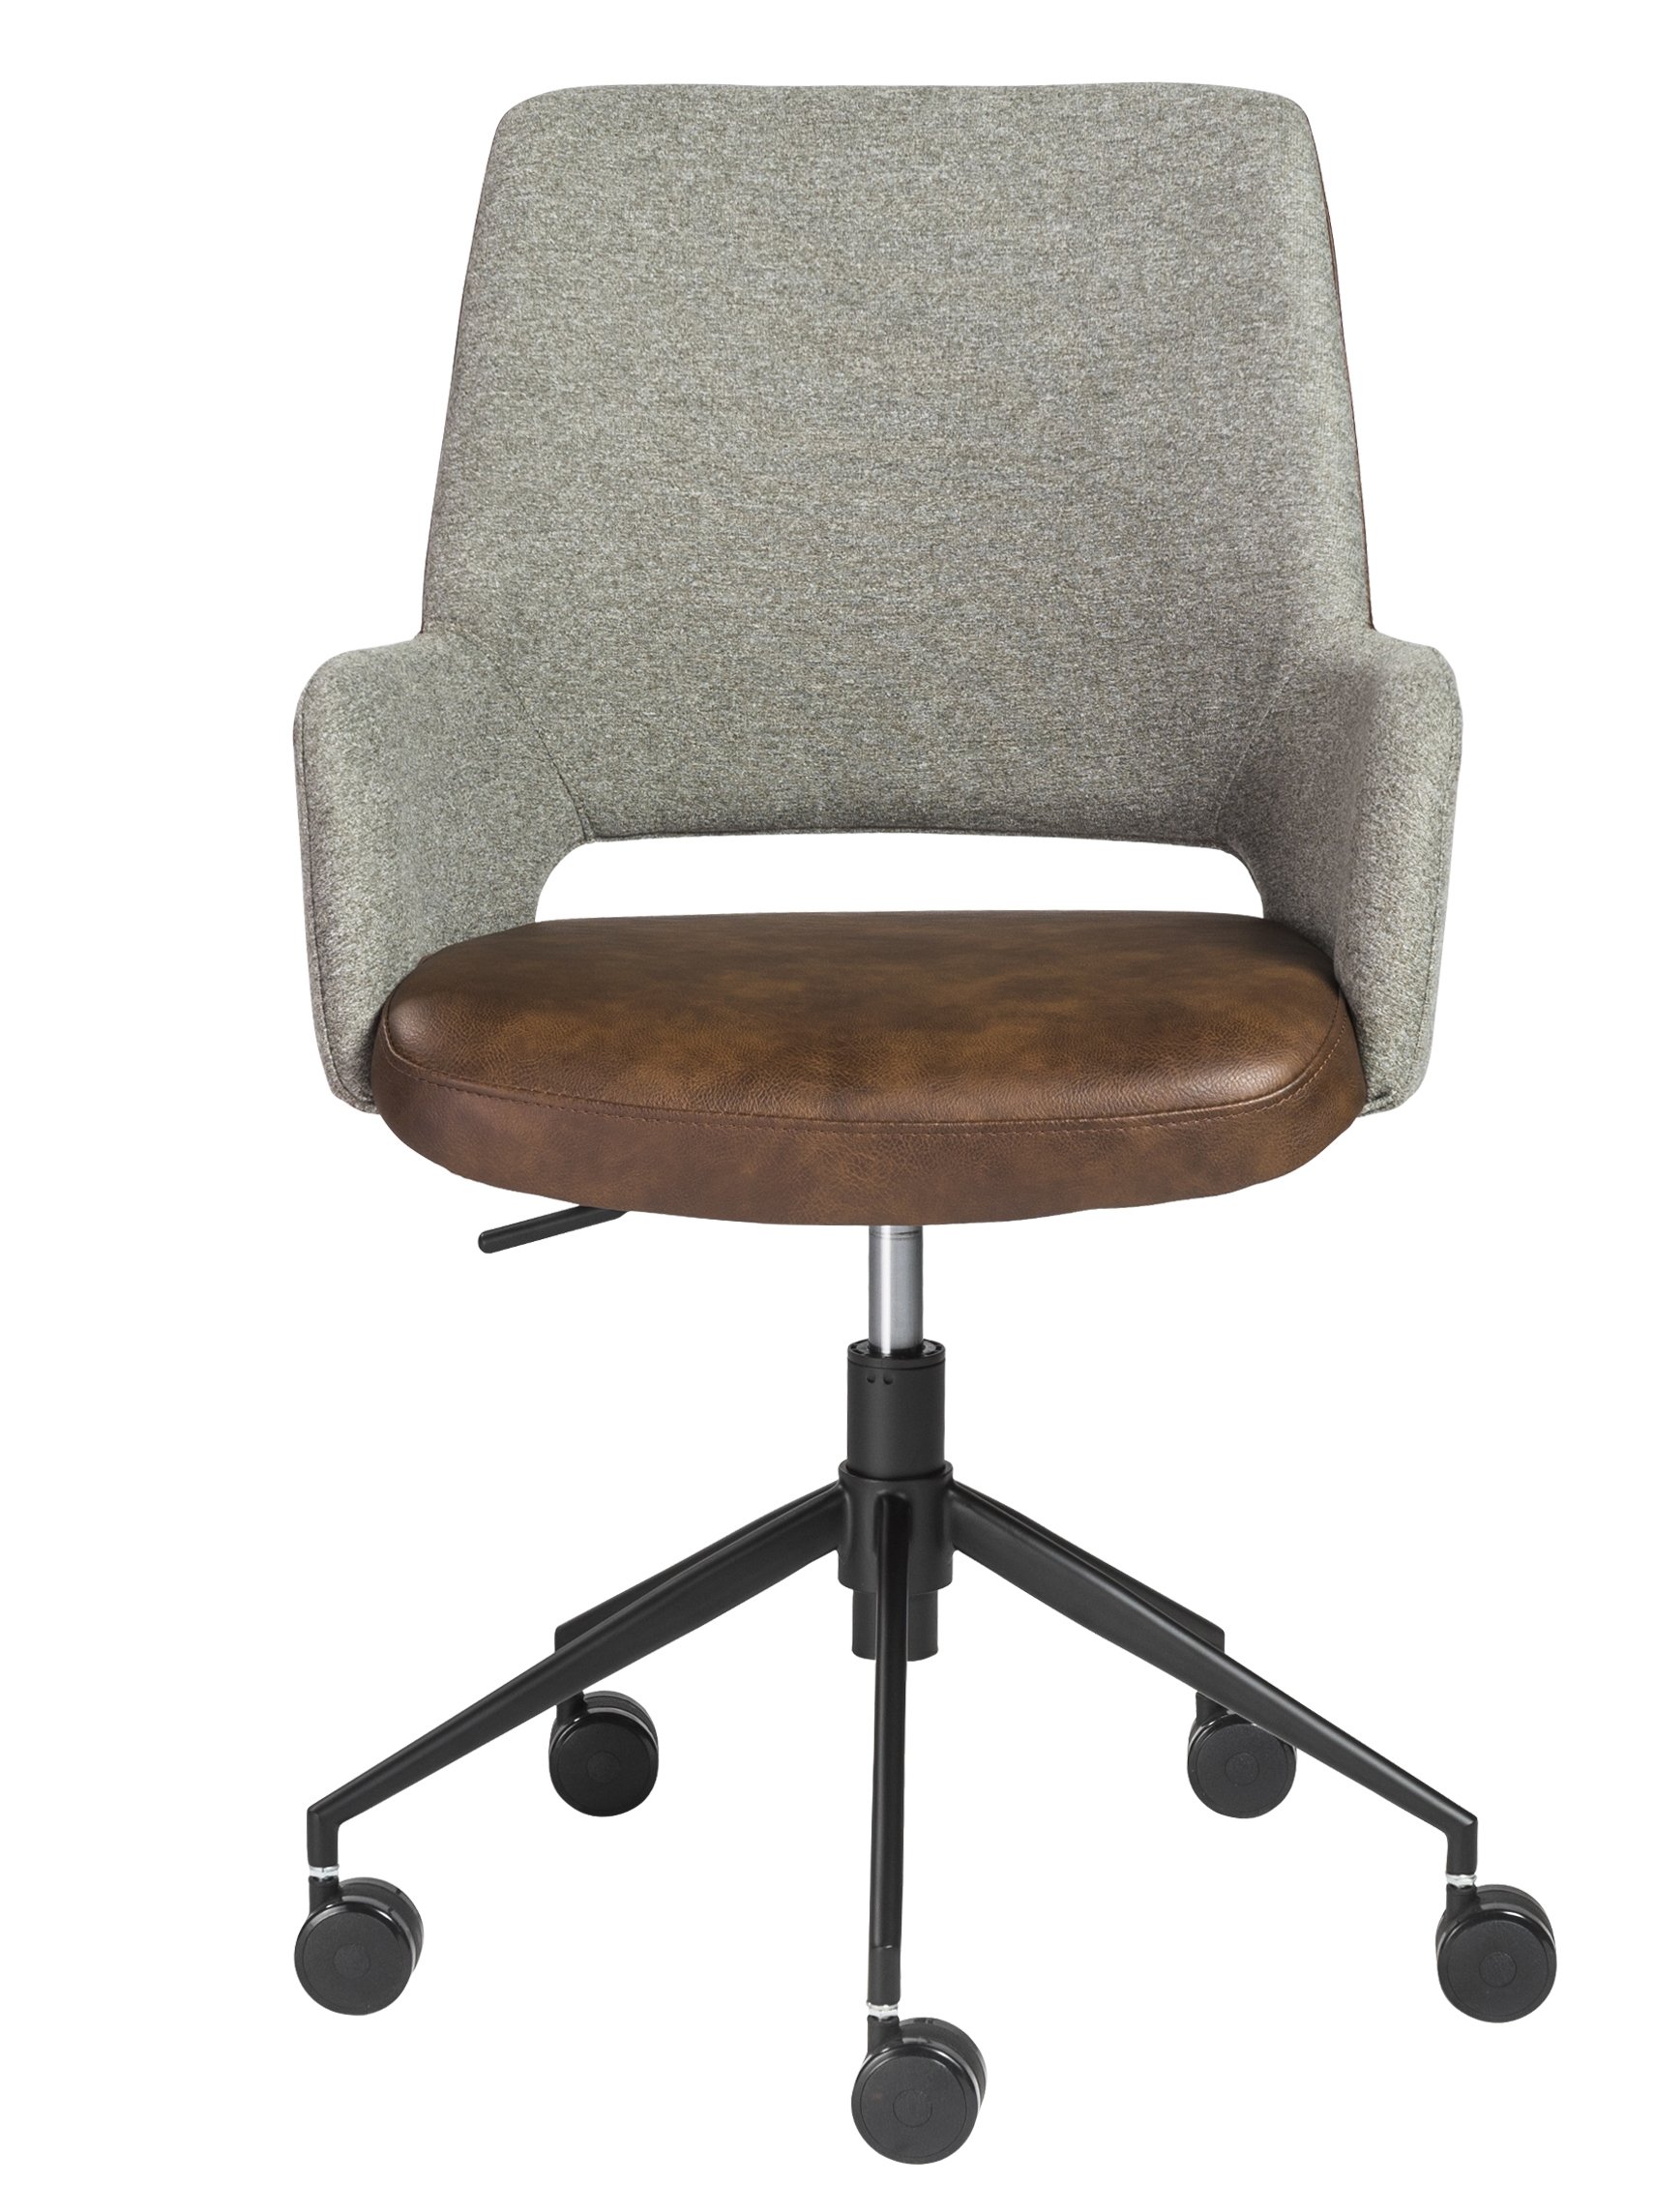 Randy Office Chair - Image 5